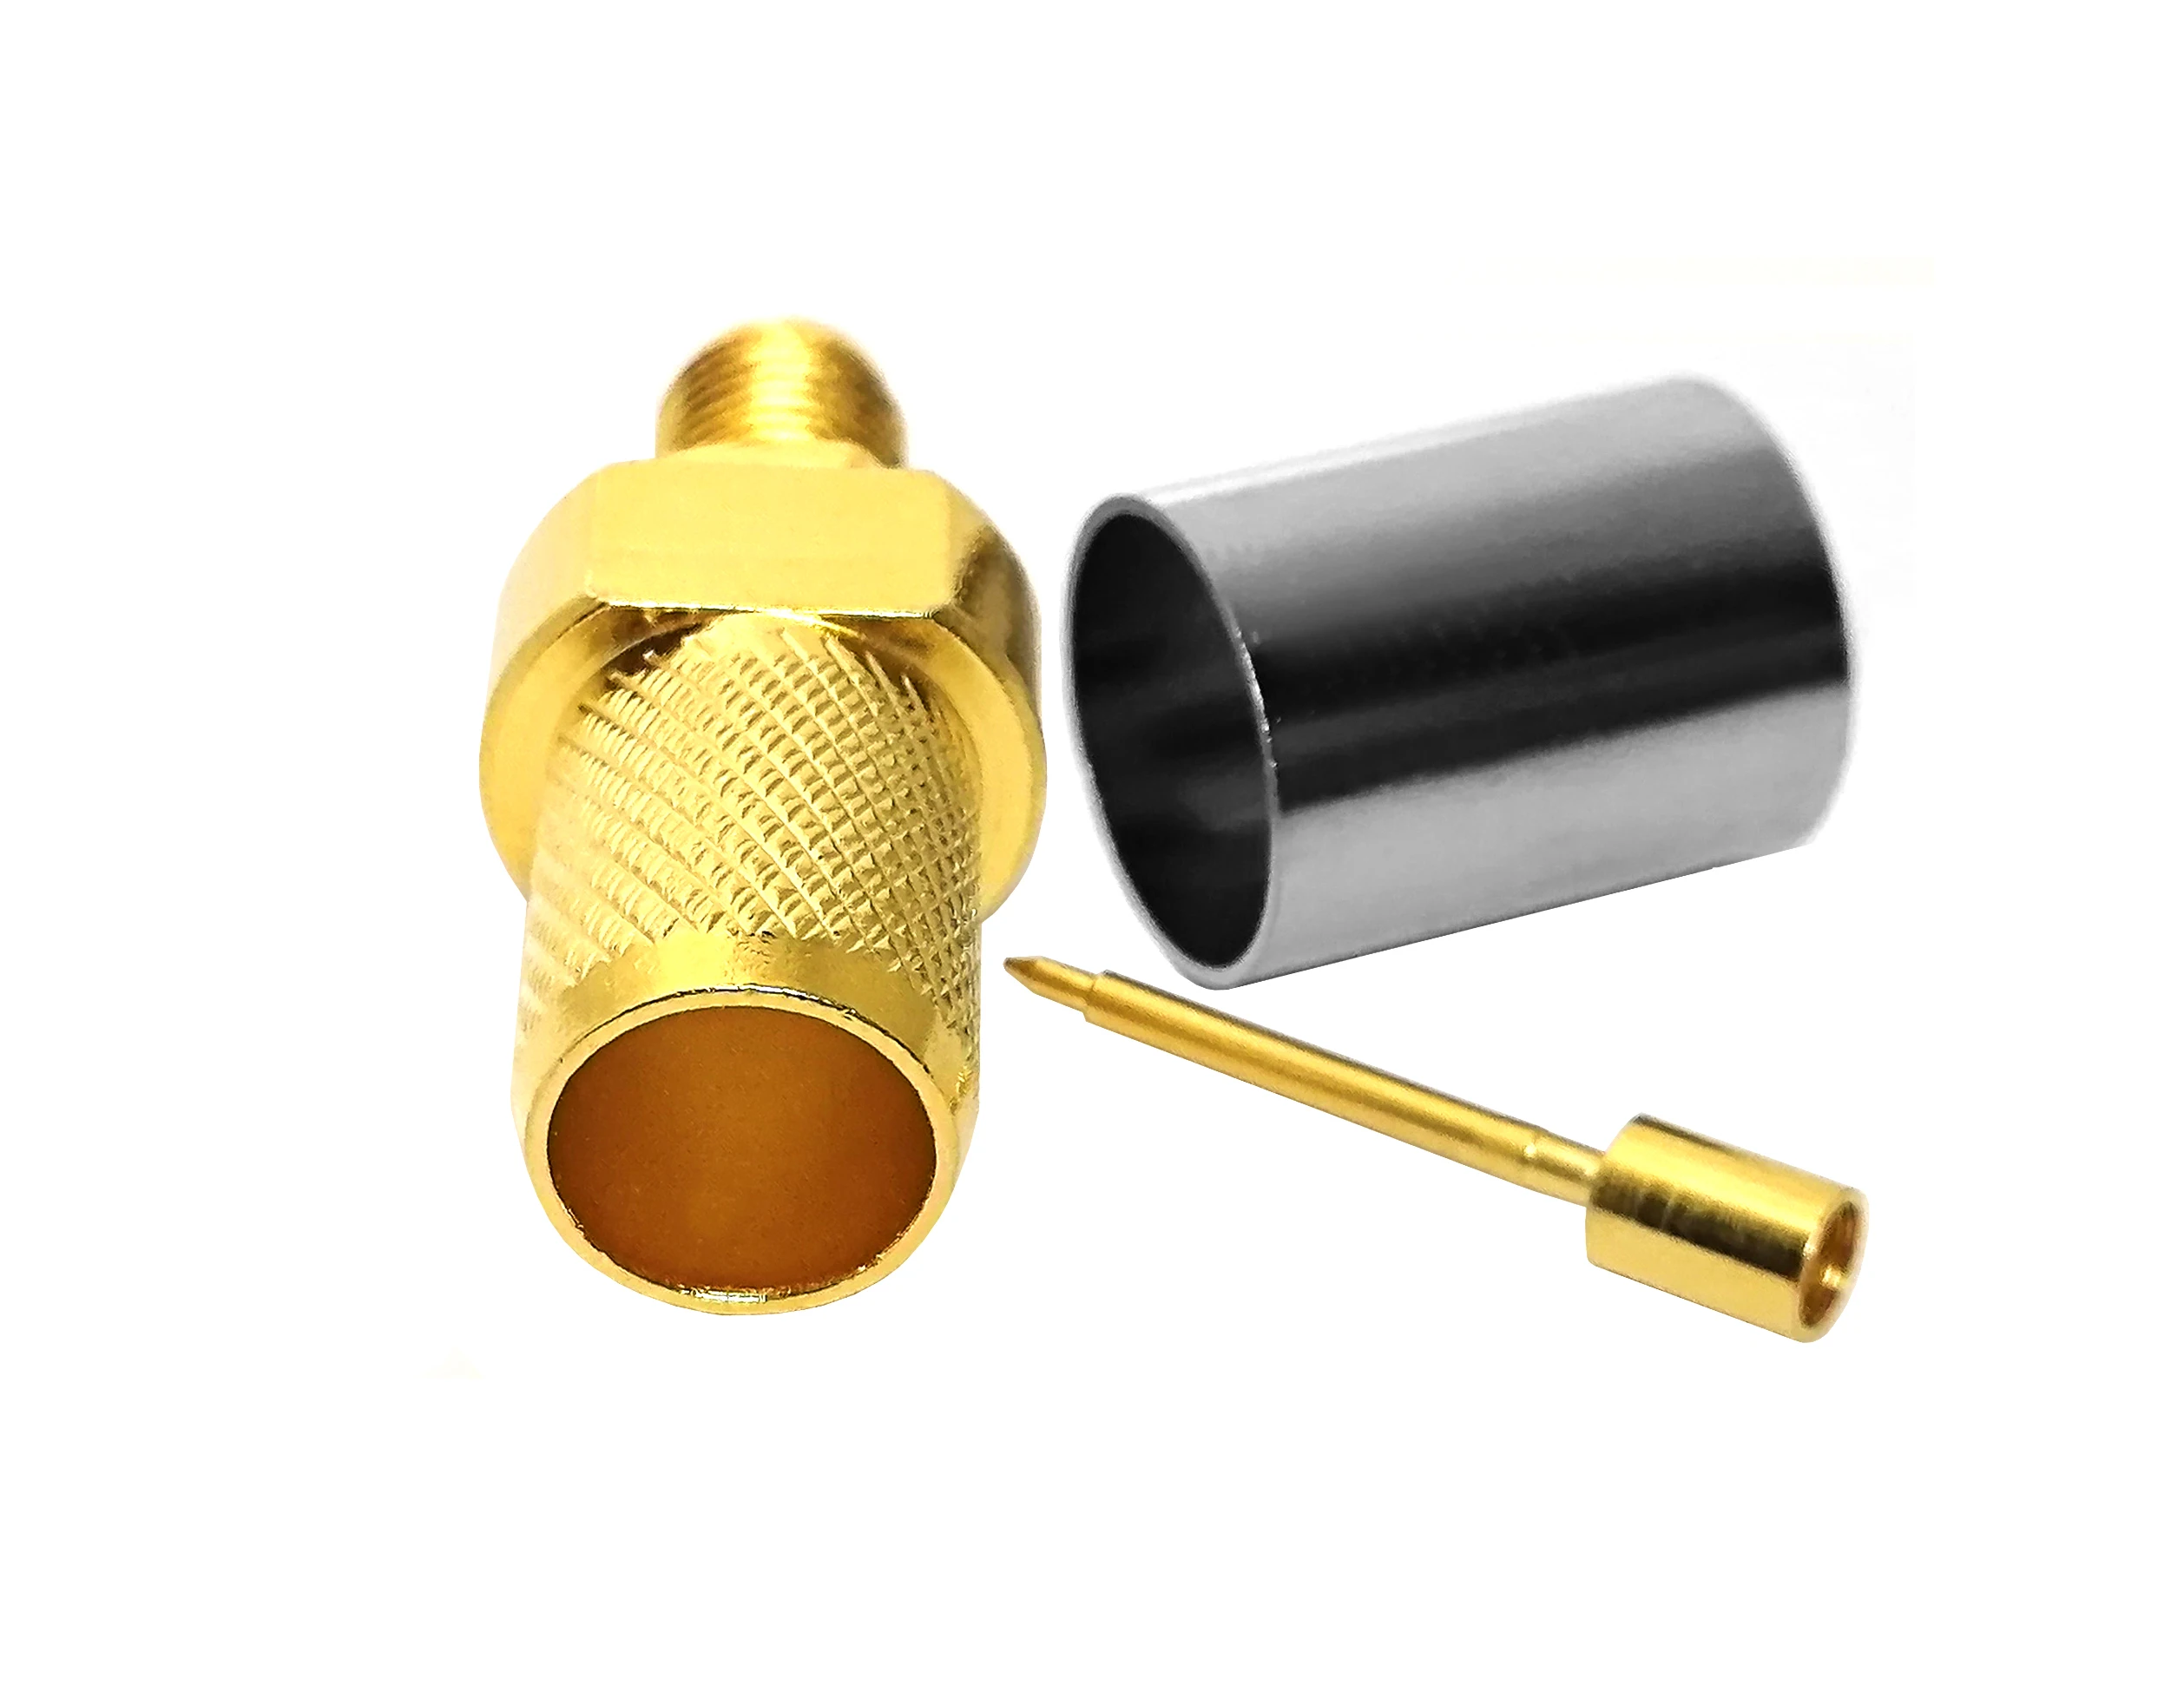 LMR400 Gold plated SMA reverse polarity sma female jack connecteur lmr400  inverted rf connectors factory